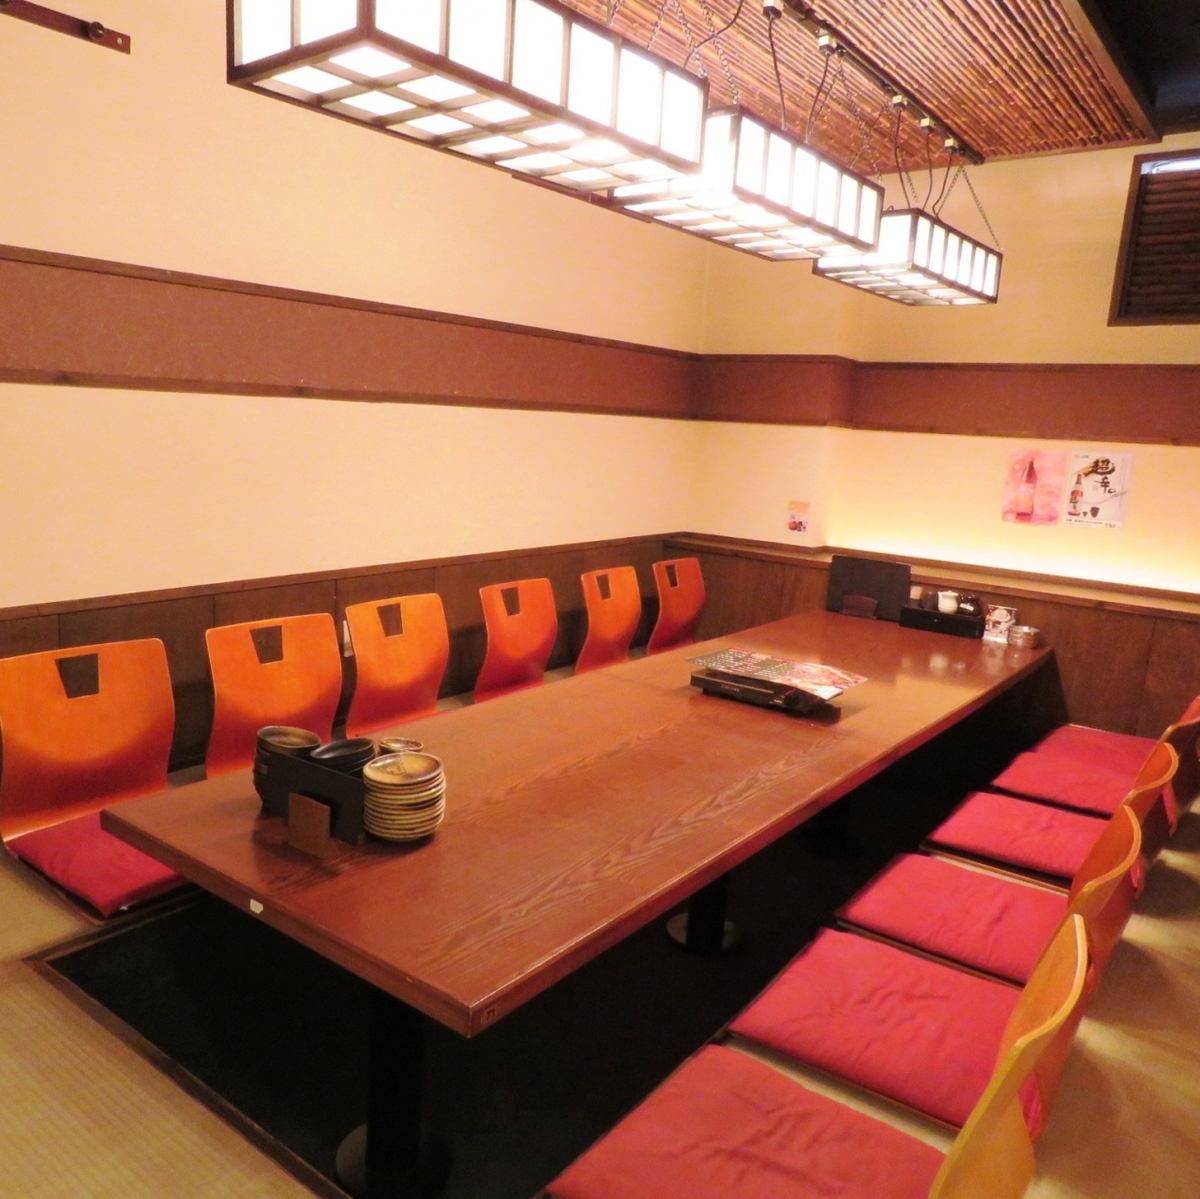 Private rooms can be reserved for up to 40 people! Relax and unwind with spacious seating available.